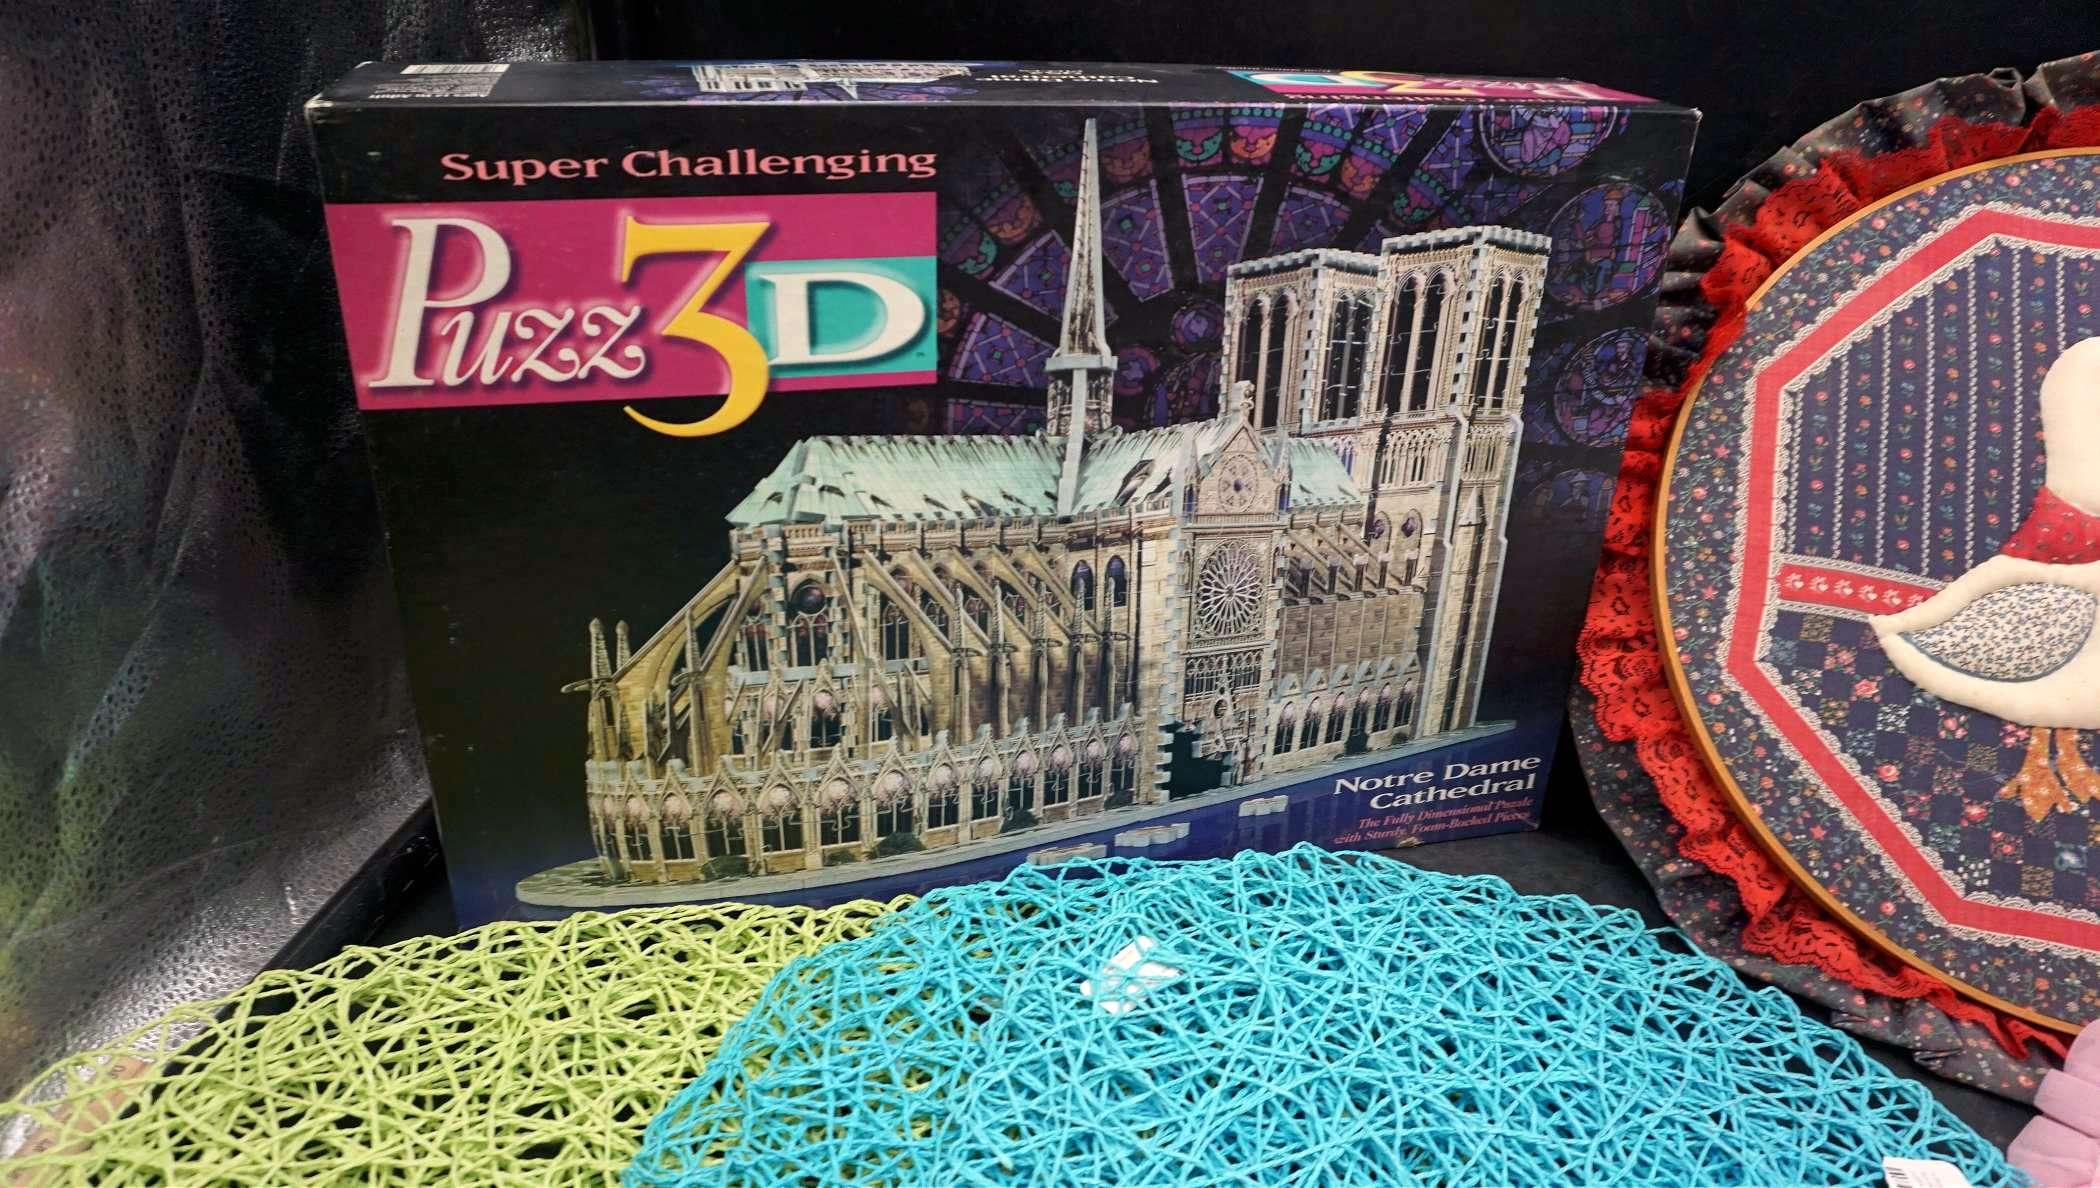 Plate Chargers, Goose Wall Decor & Puzz 3D Notre Dame Cathedral